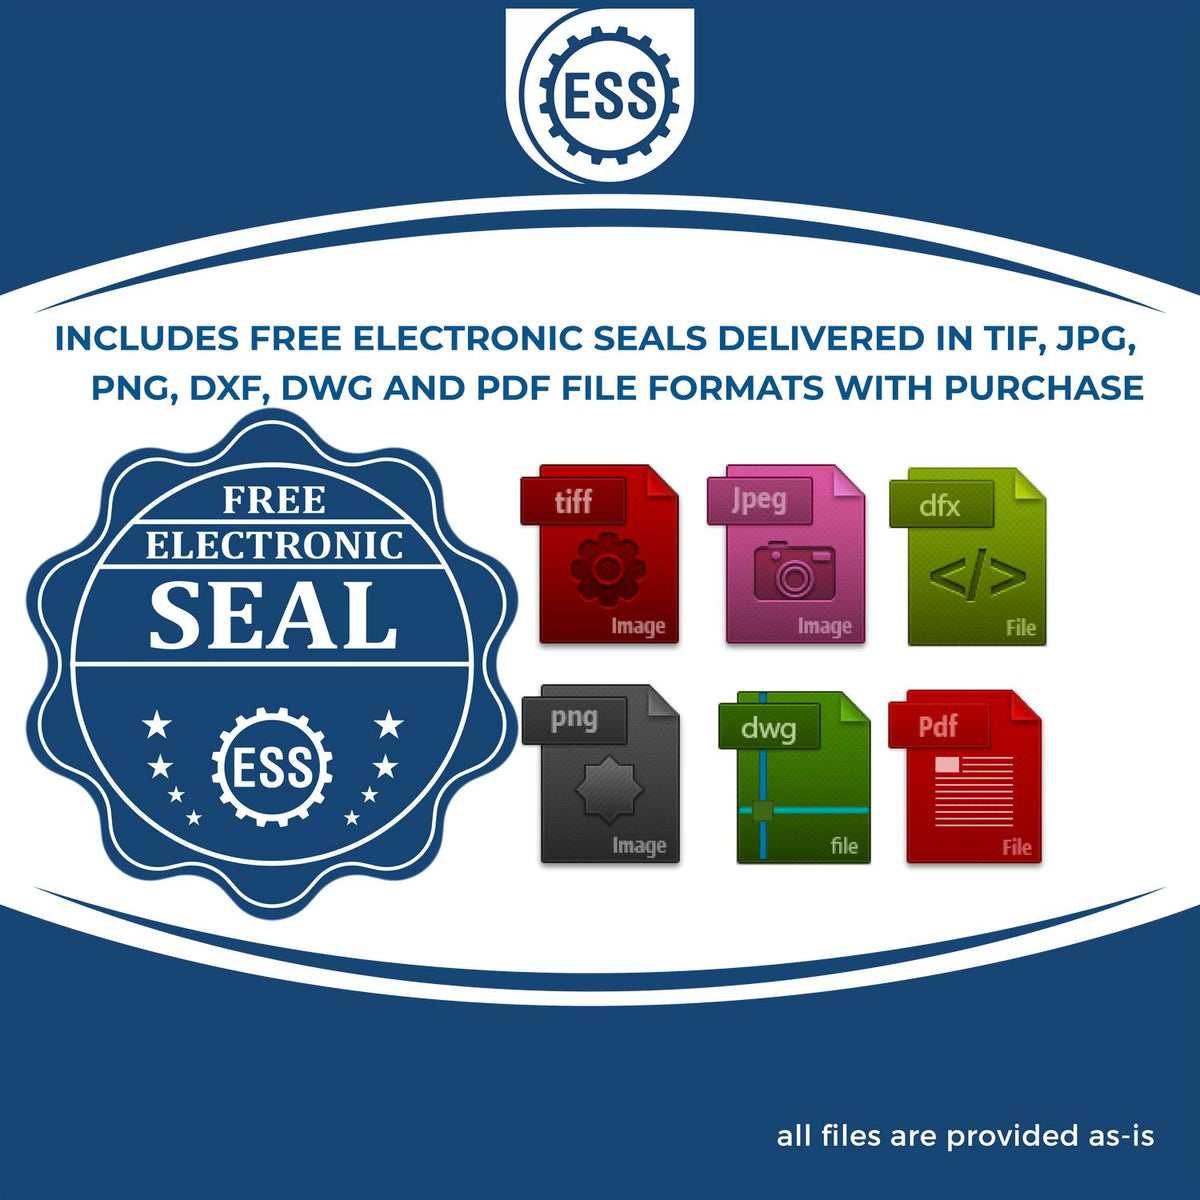 An infographic for the free electronic seal for the Hybrid South Dakota Geologist Seal illustrating the different file type icons such as DXF, DWG, TIF, JPG and PNG.